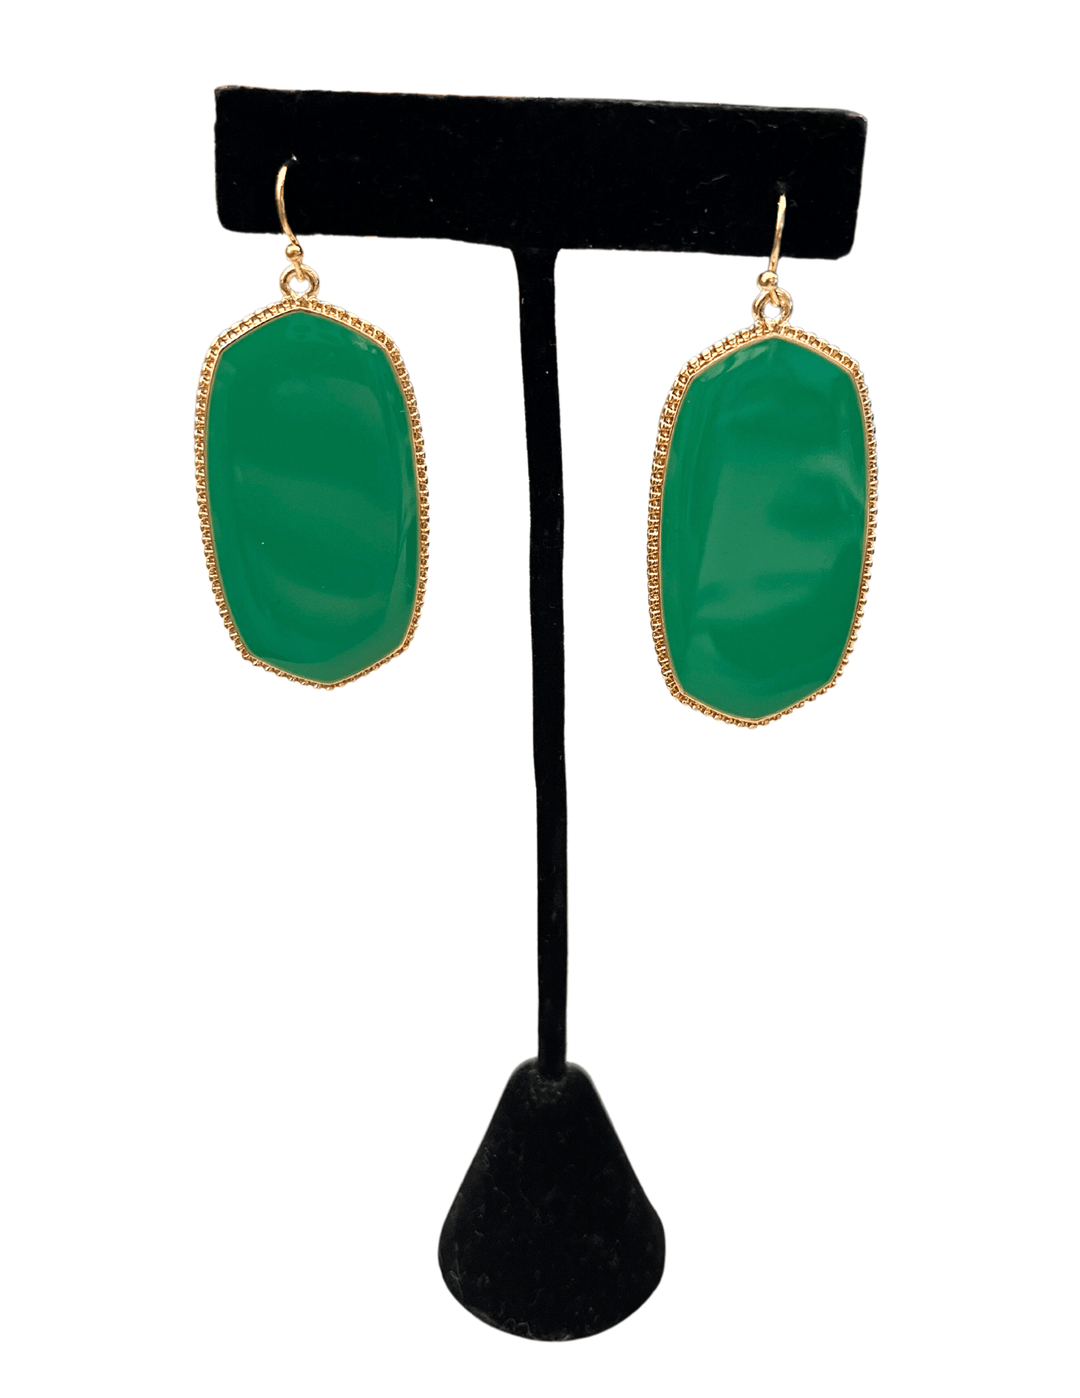 kendra brand style shapes earrings tres chic boutique colorful kelly green